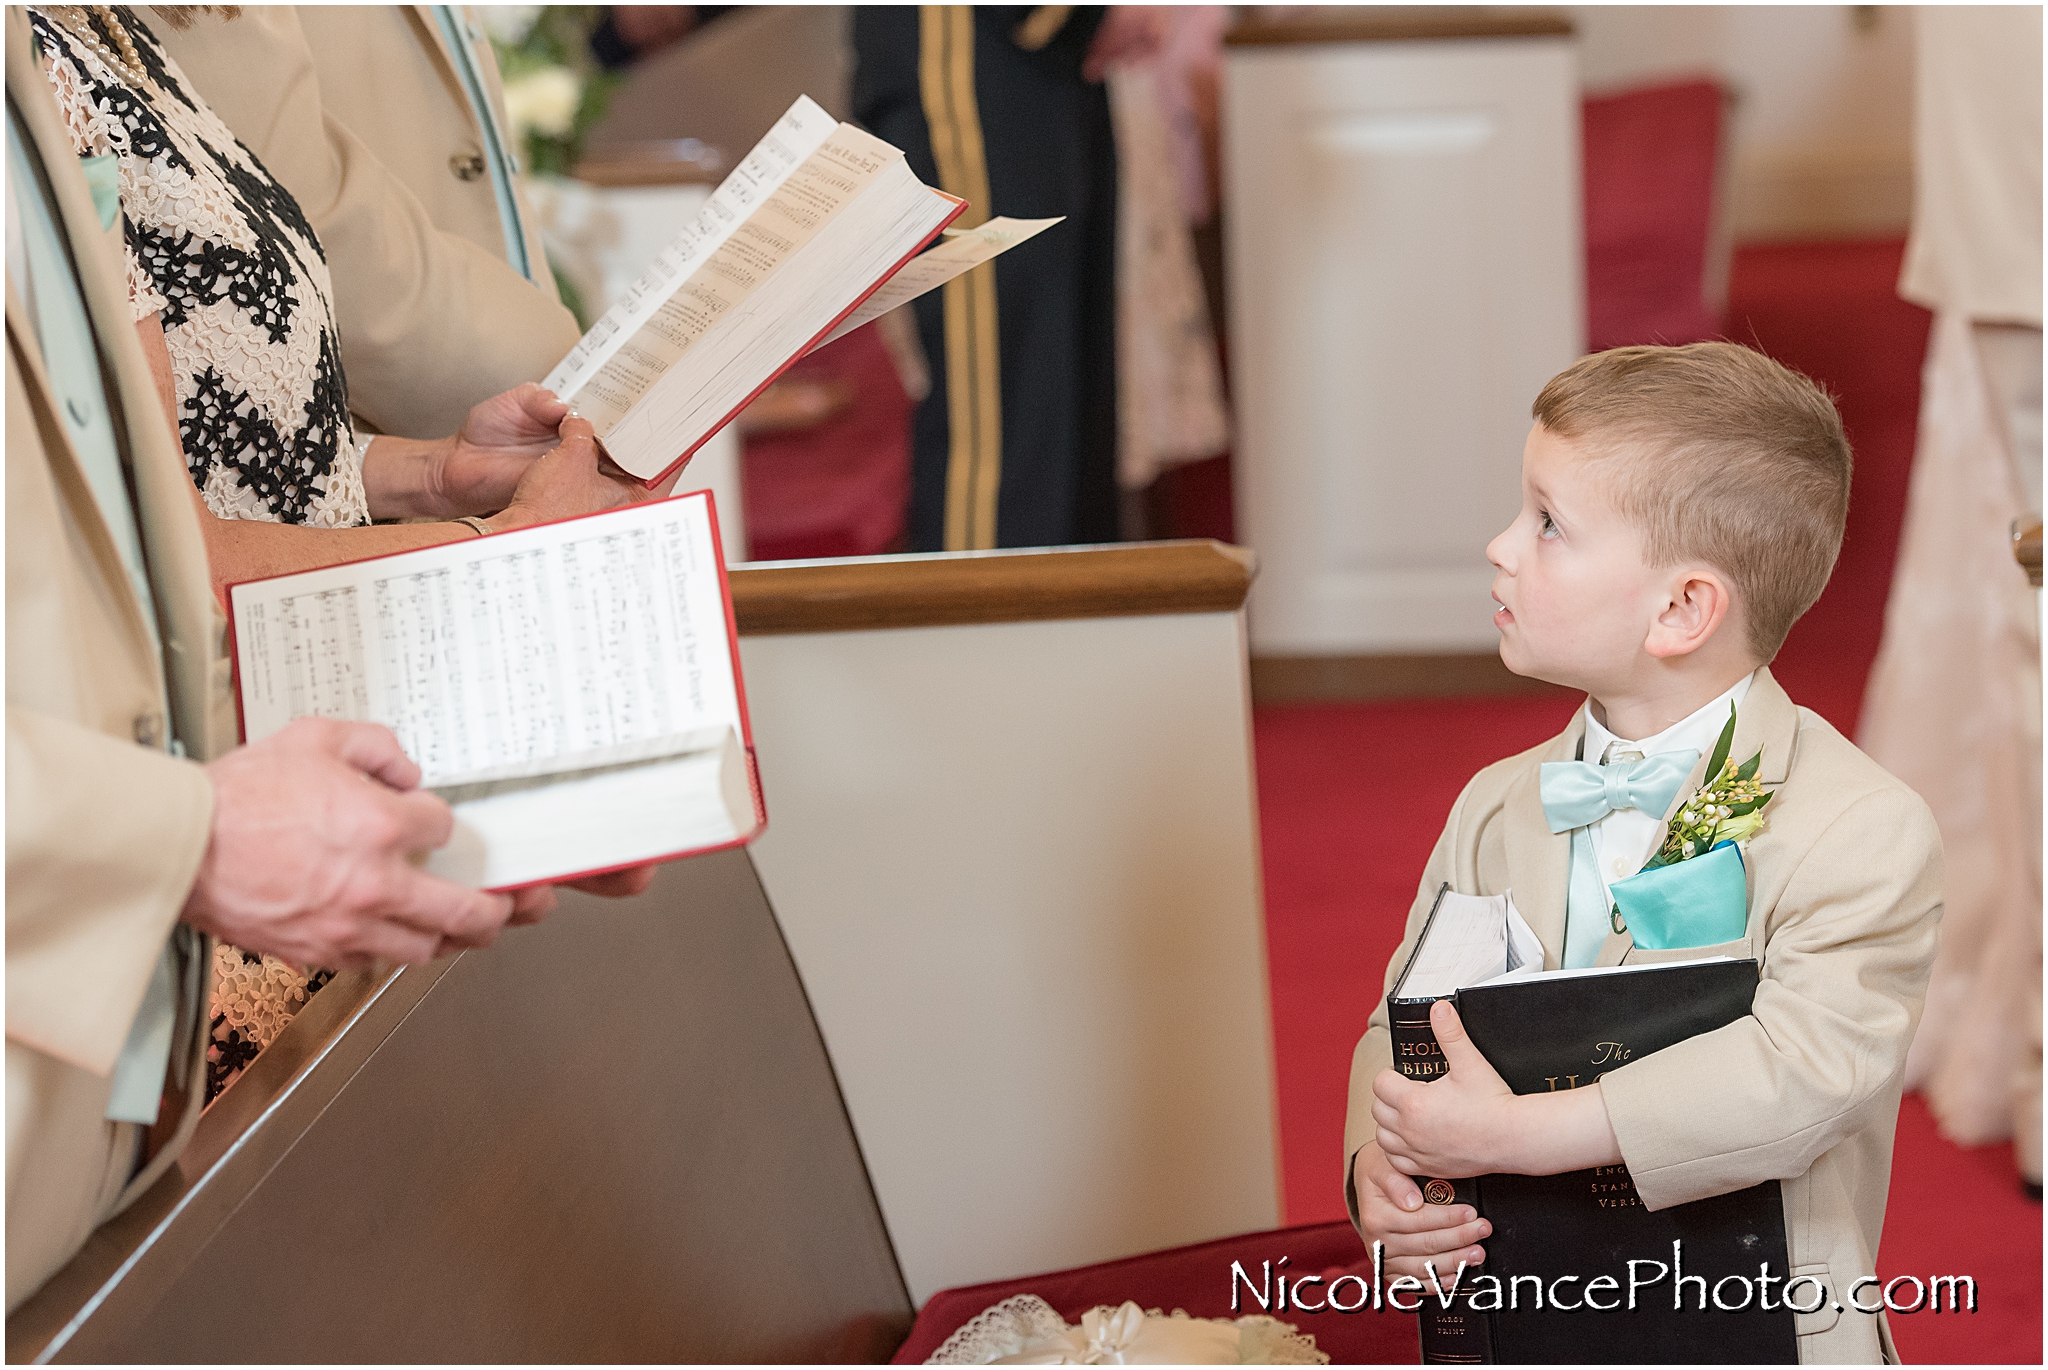 The ring bearer at the wedding ceremony at Crestwood Presbyterian Church in Richmond VA